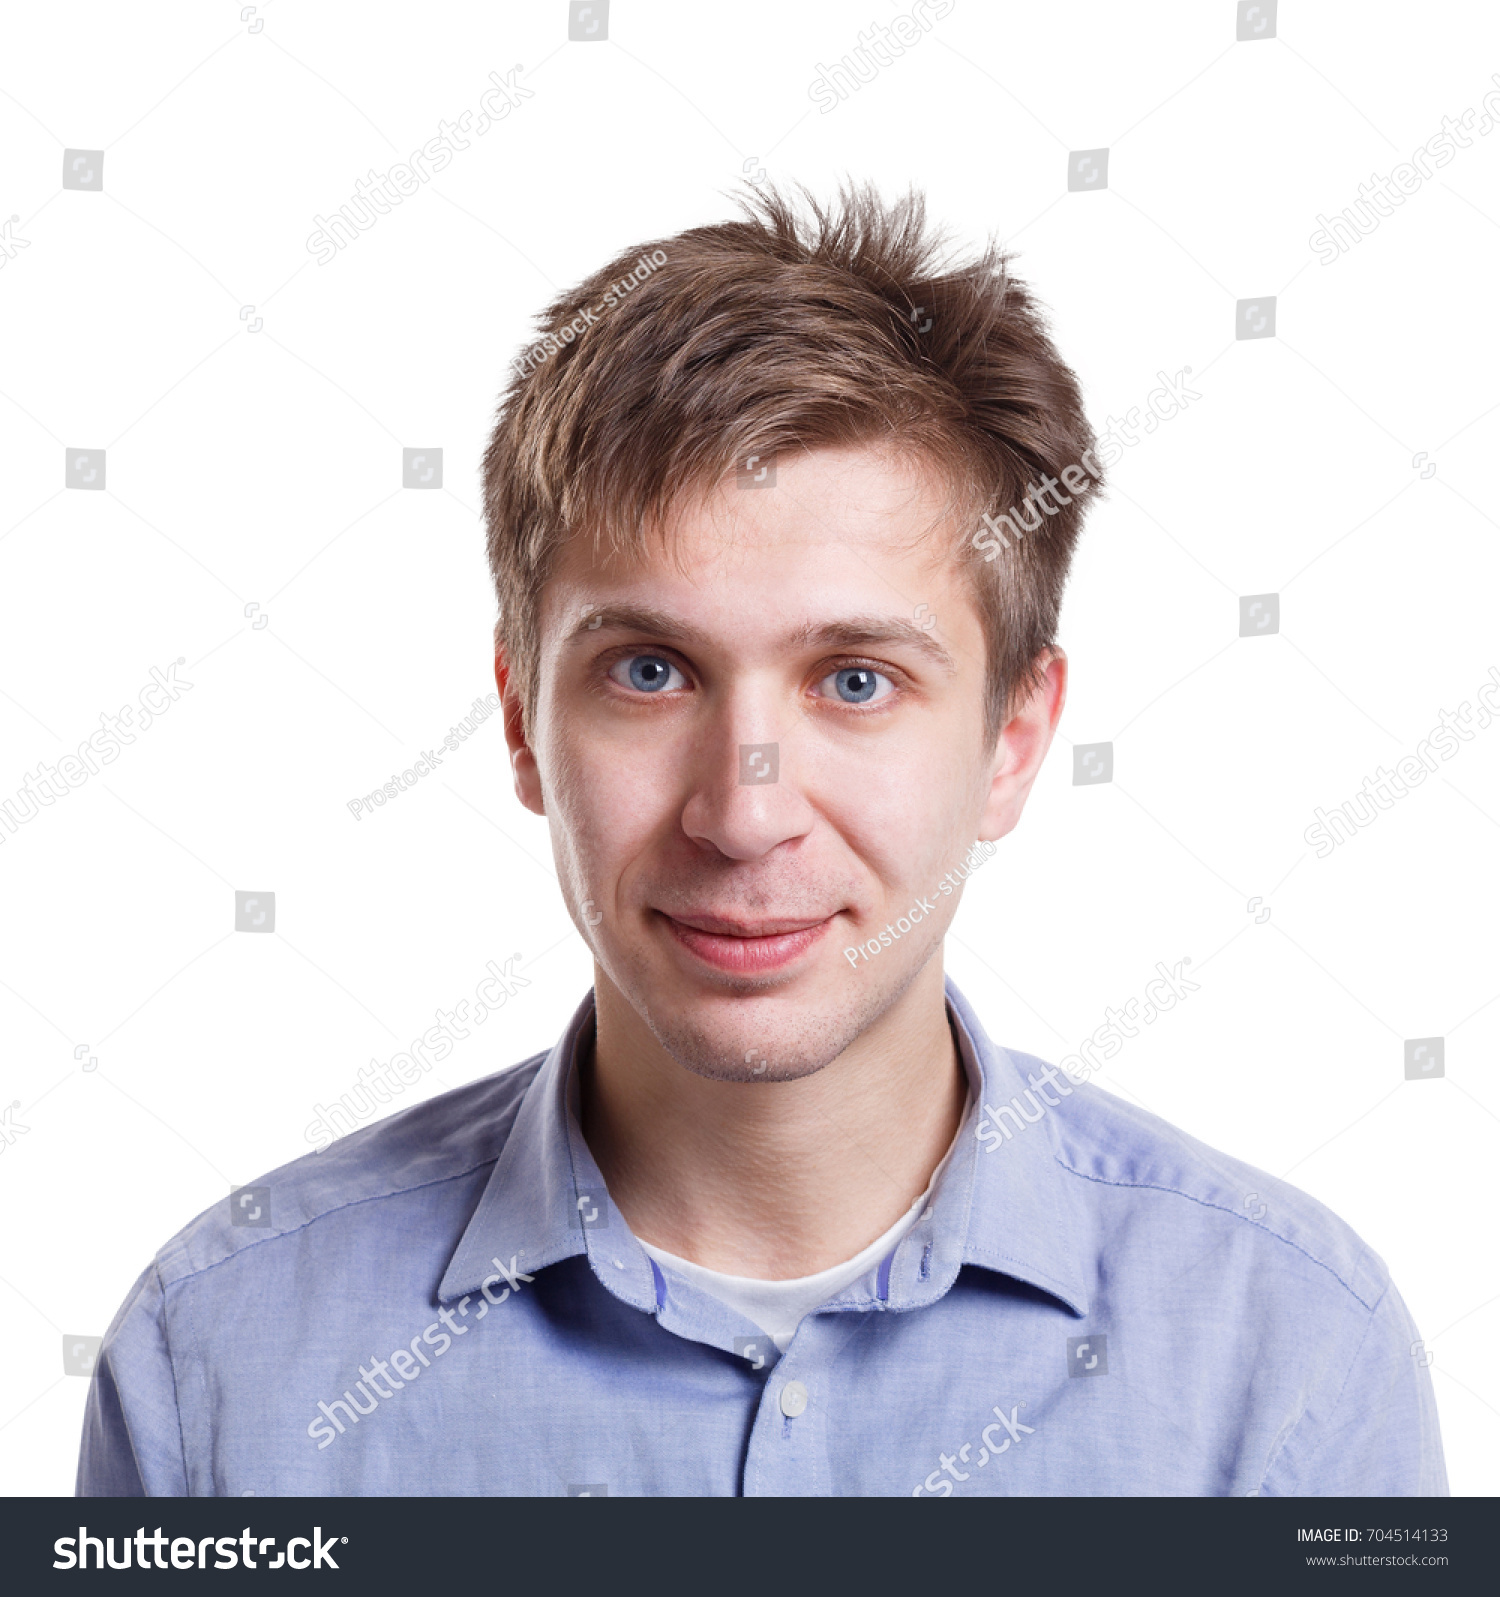 Positive Emotion Cheerful Man Smiling On Stock Photo 704514133 ...